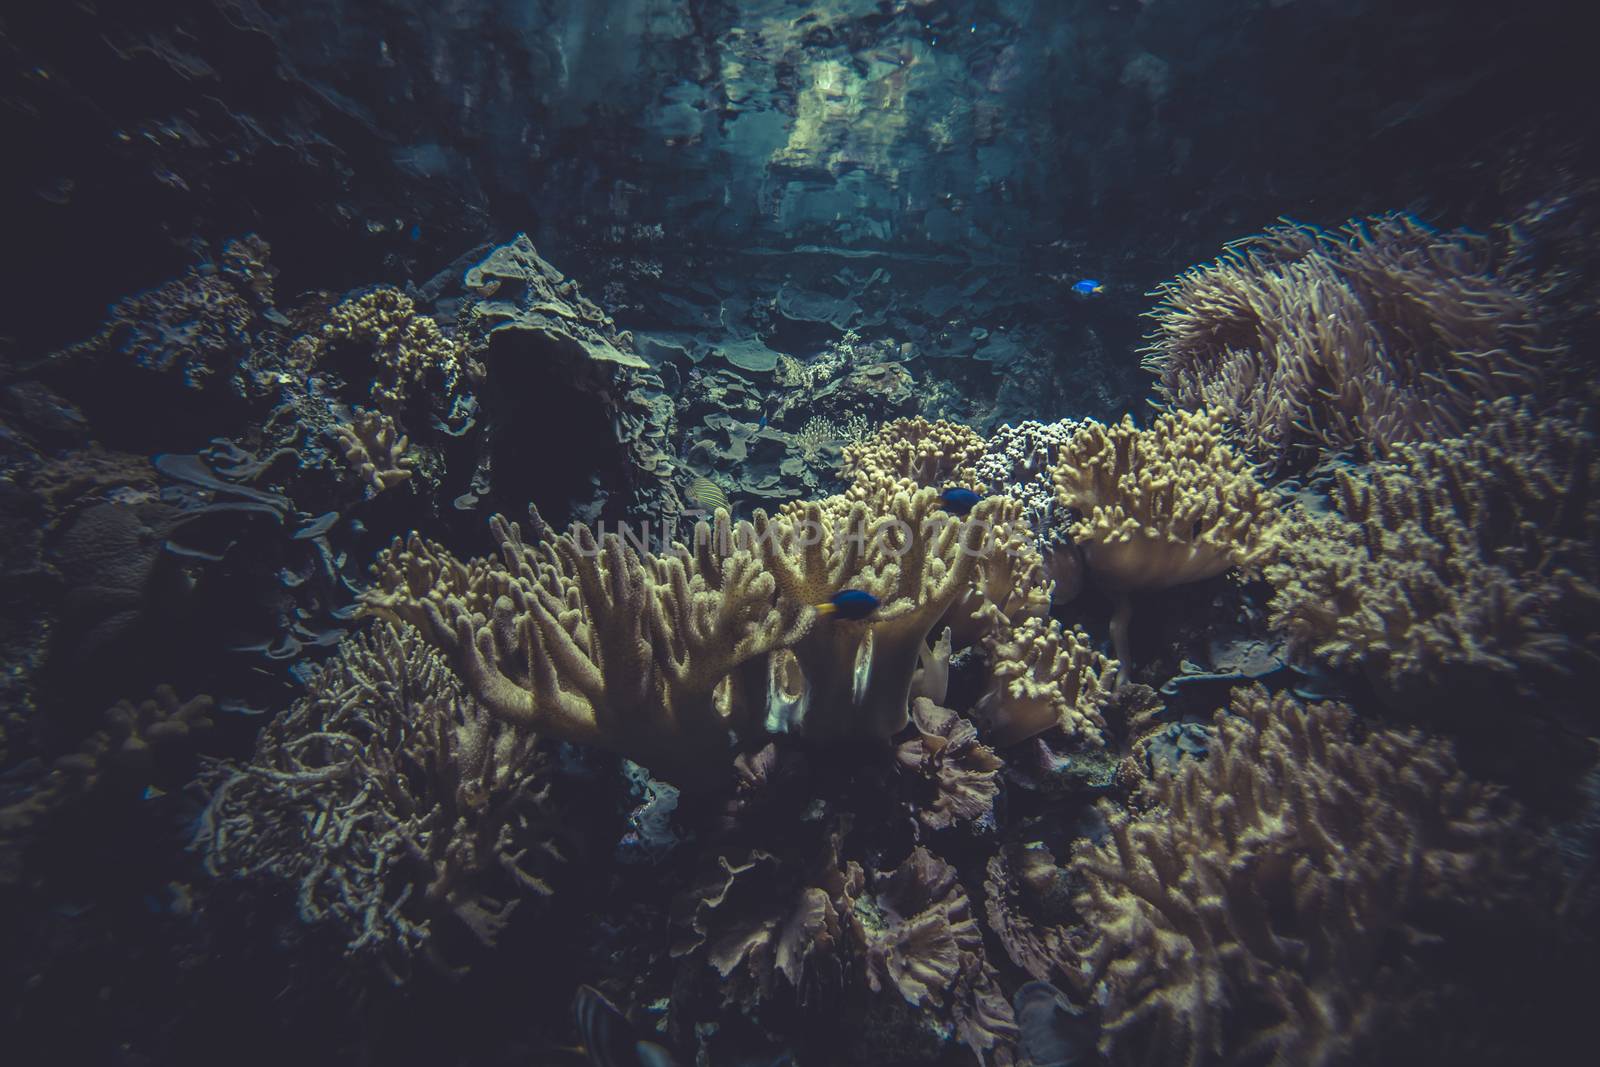 small coral reef ecosystem